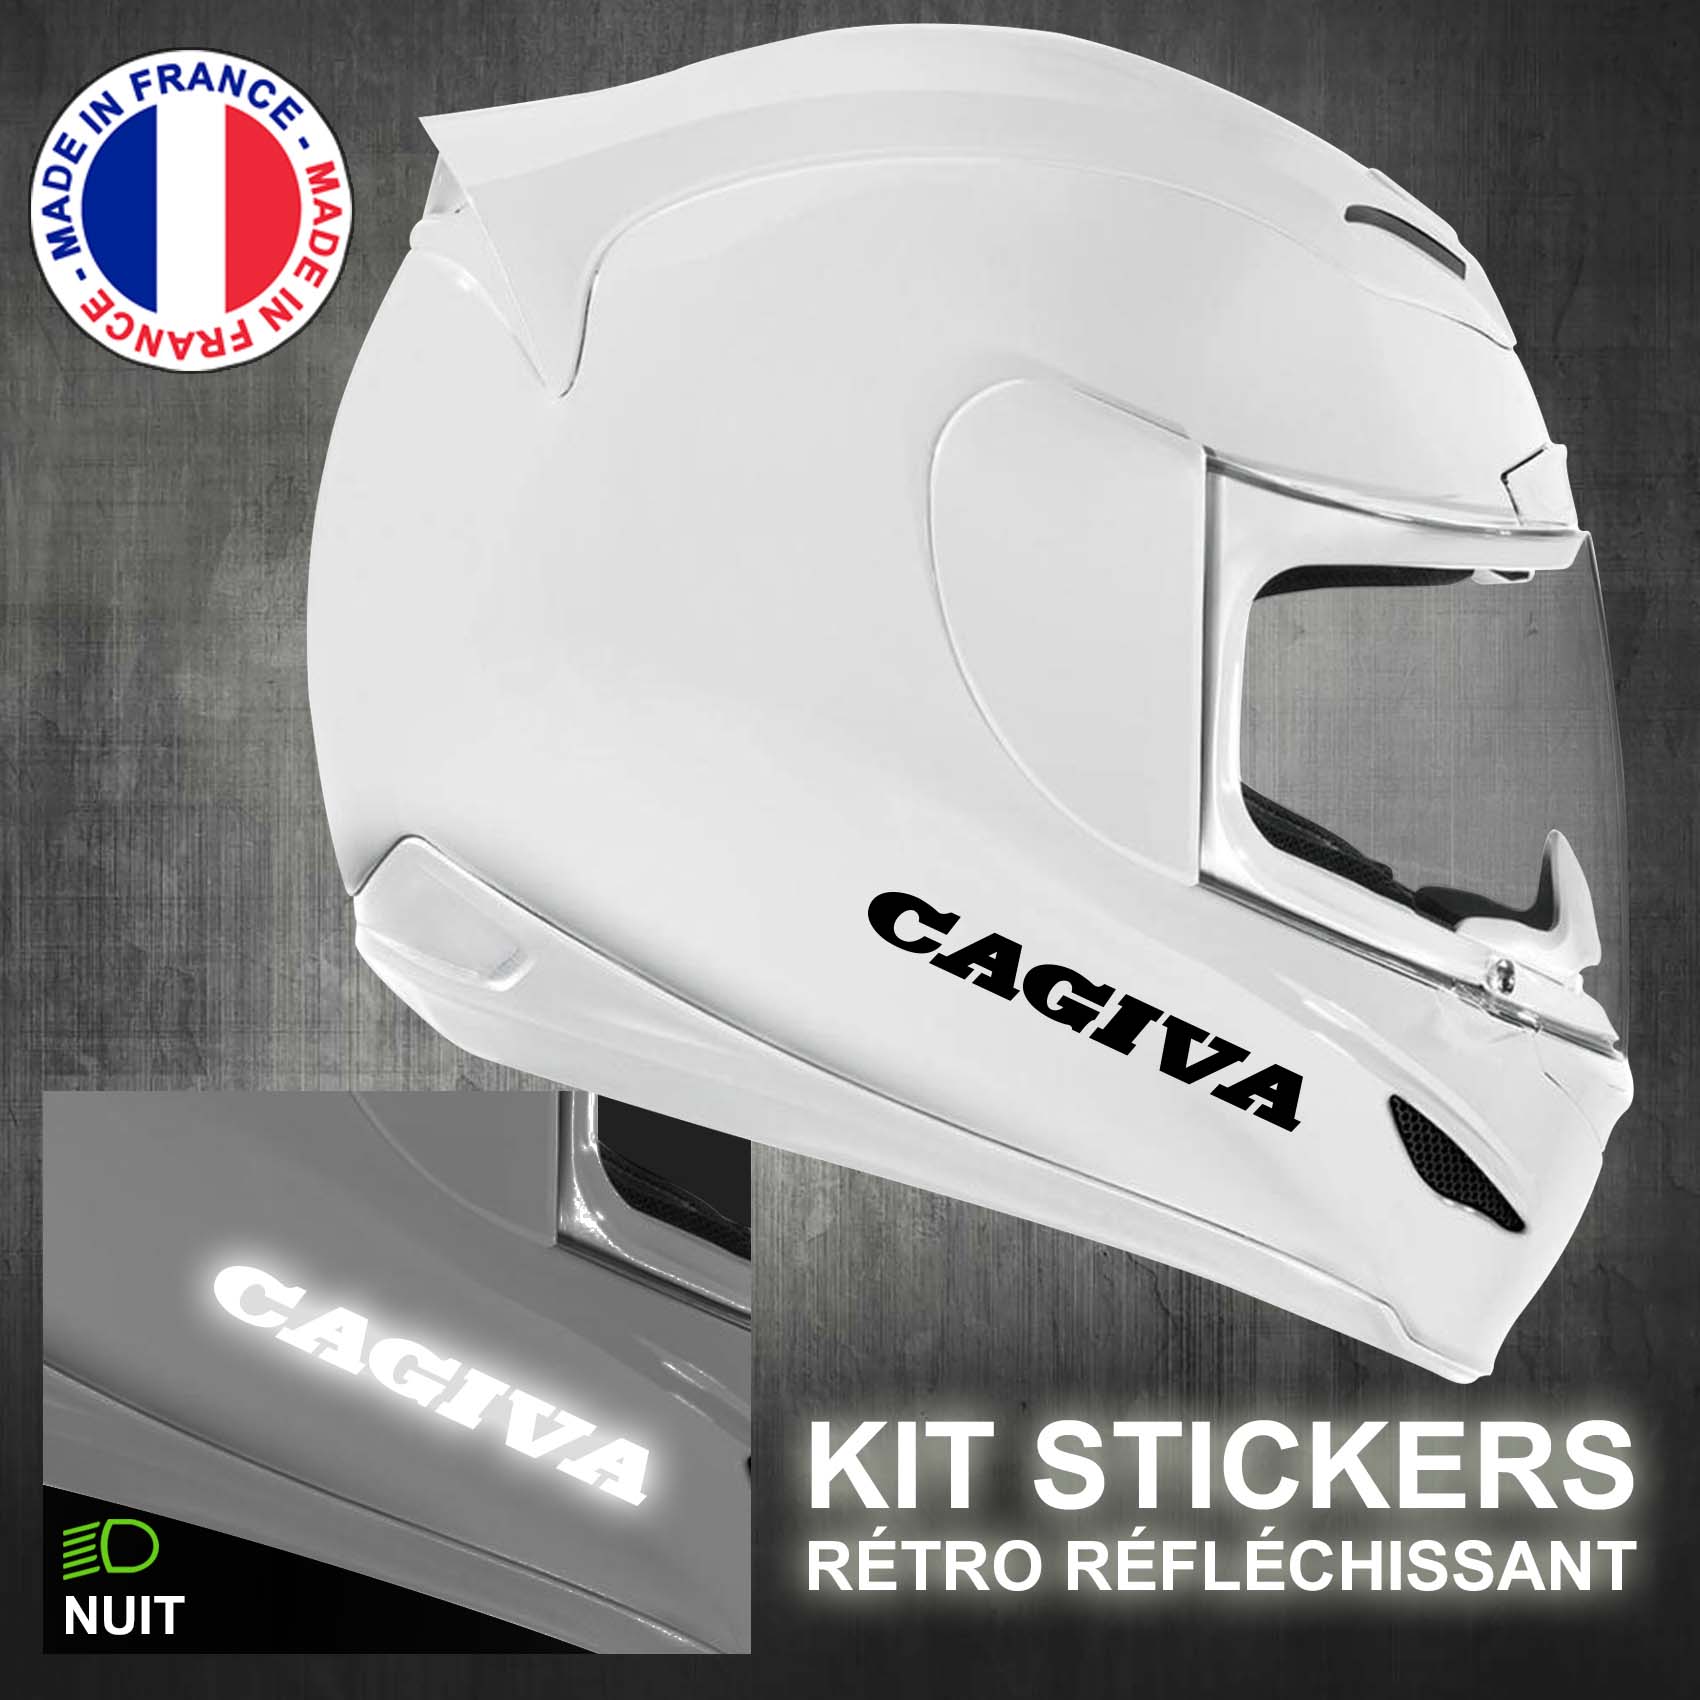 stickers-casque-moto-cagiva-ref1-retro-reflechissant-autocollant-moto-velo-tuning-racing-route-sticker-casques-adhesif-scooter-nuit-securite-decals-personnalise-personnalisable-min